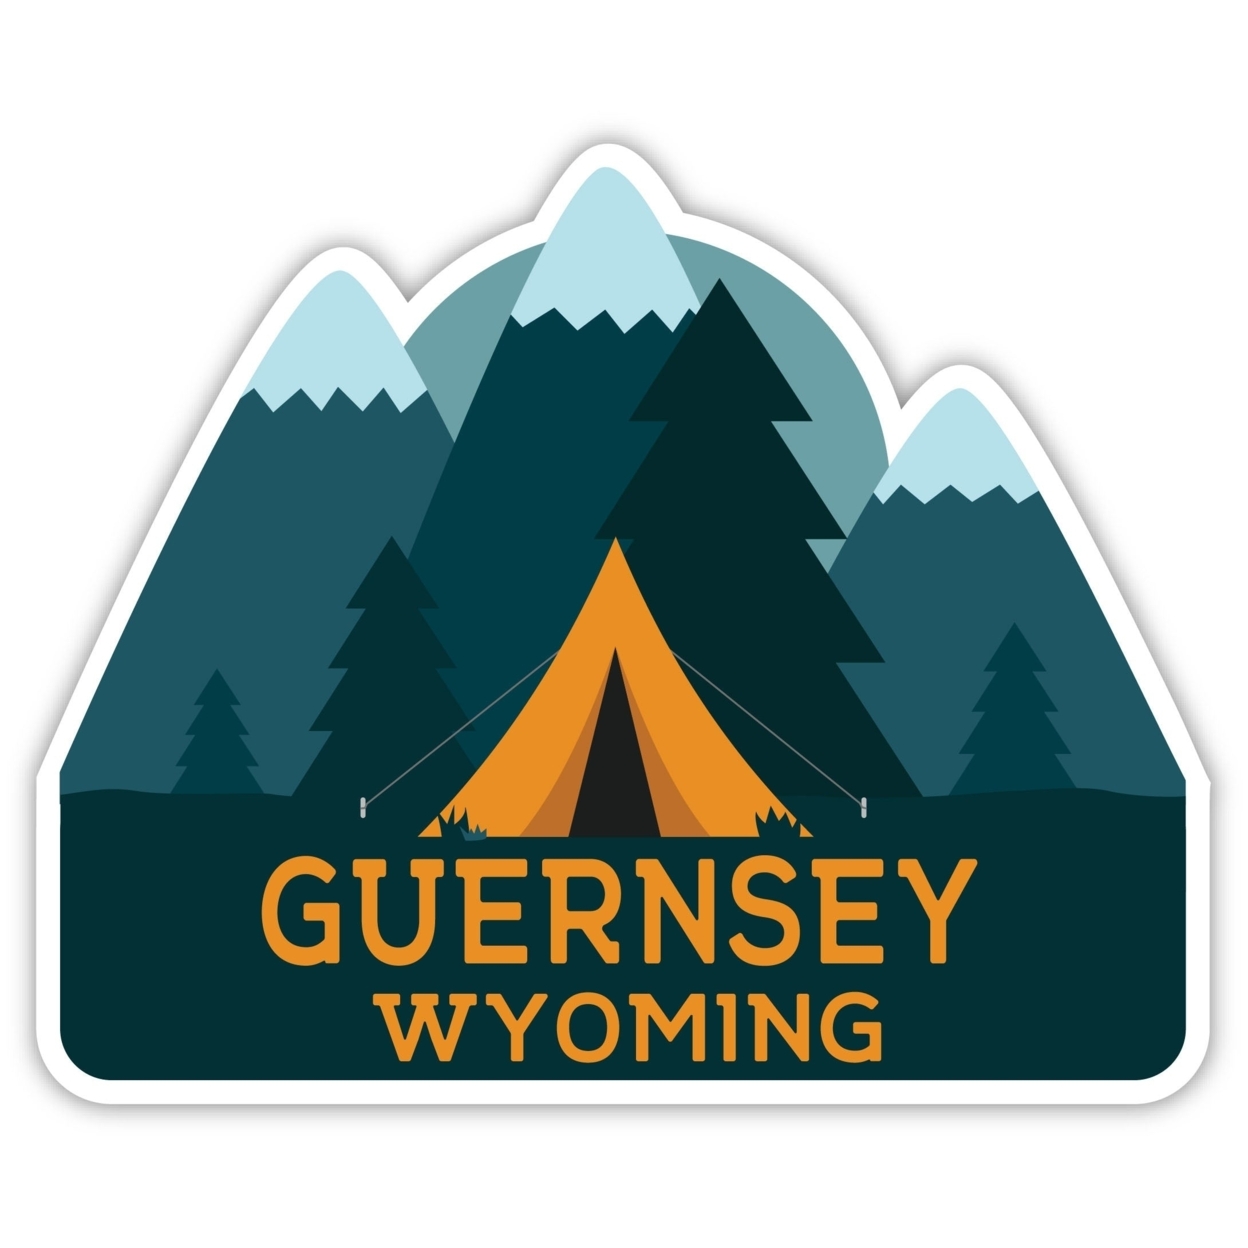 Guernsey Wyoming Souvenir Decorative Stickers (Choose Theme And Size) - Single Unit, 10-Inch, Tent